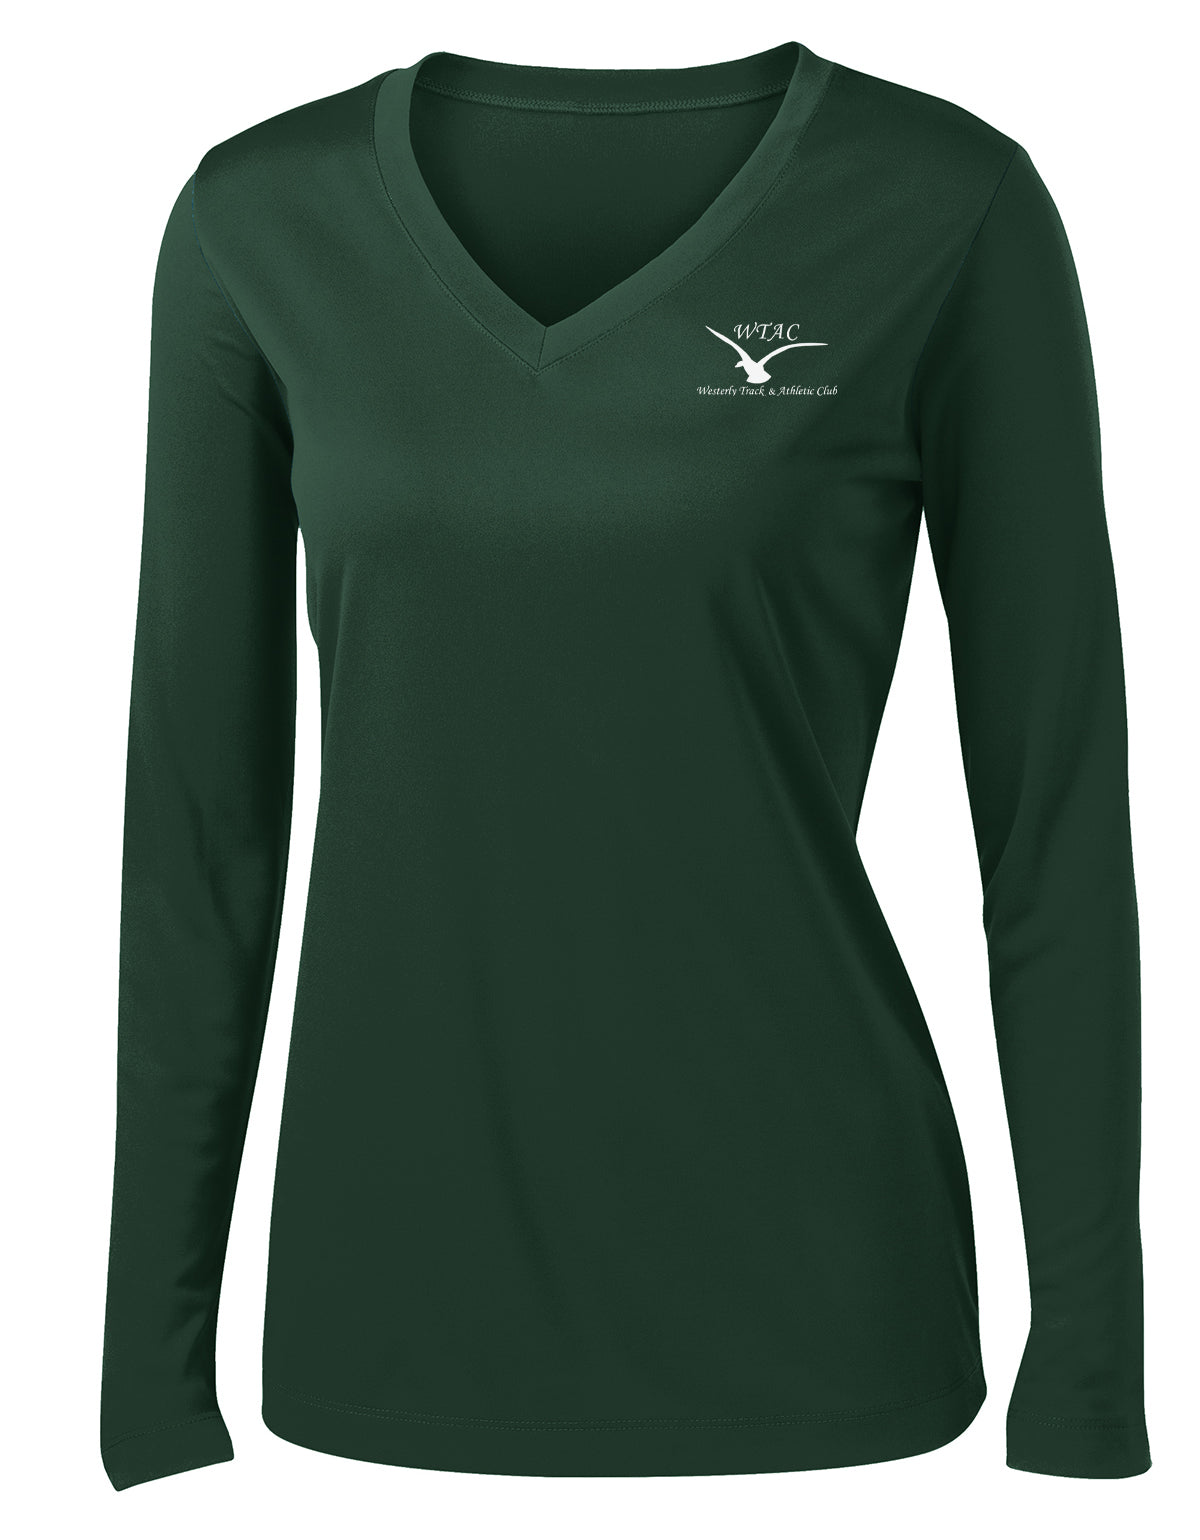 Westerly Track & Athletic Club Women's Long Sleeve Performance Shirt